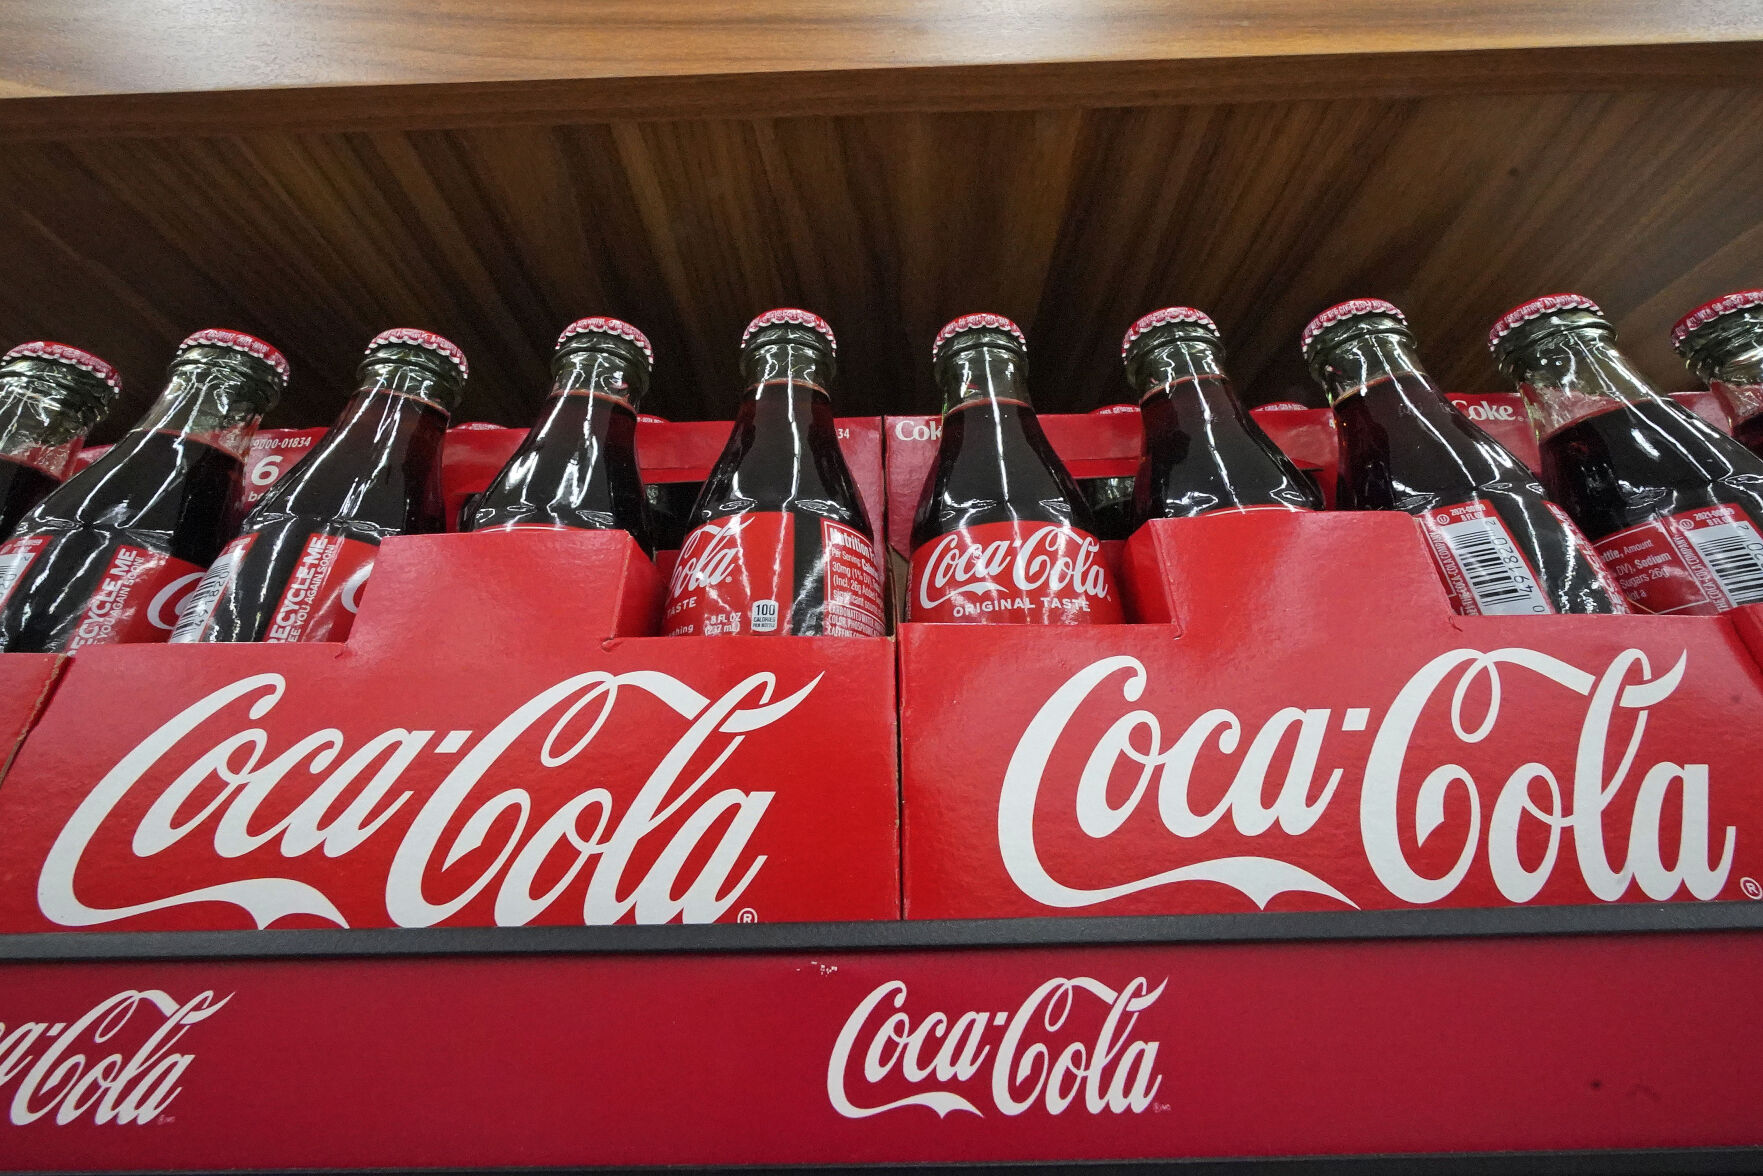 <p>Bottles of Coca-Cola are on display at a grocery market in Uniontown, Pa, on Sunday, April 24, 2022. Coca-Cola reports earnings on Tuesday, Oct. 24, 2023. (AP Photo/Gene J. Puskar)</p>   PHOTO CREDIT: Gene J. Puskar 